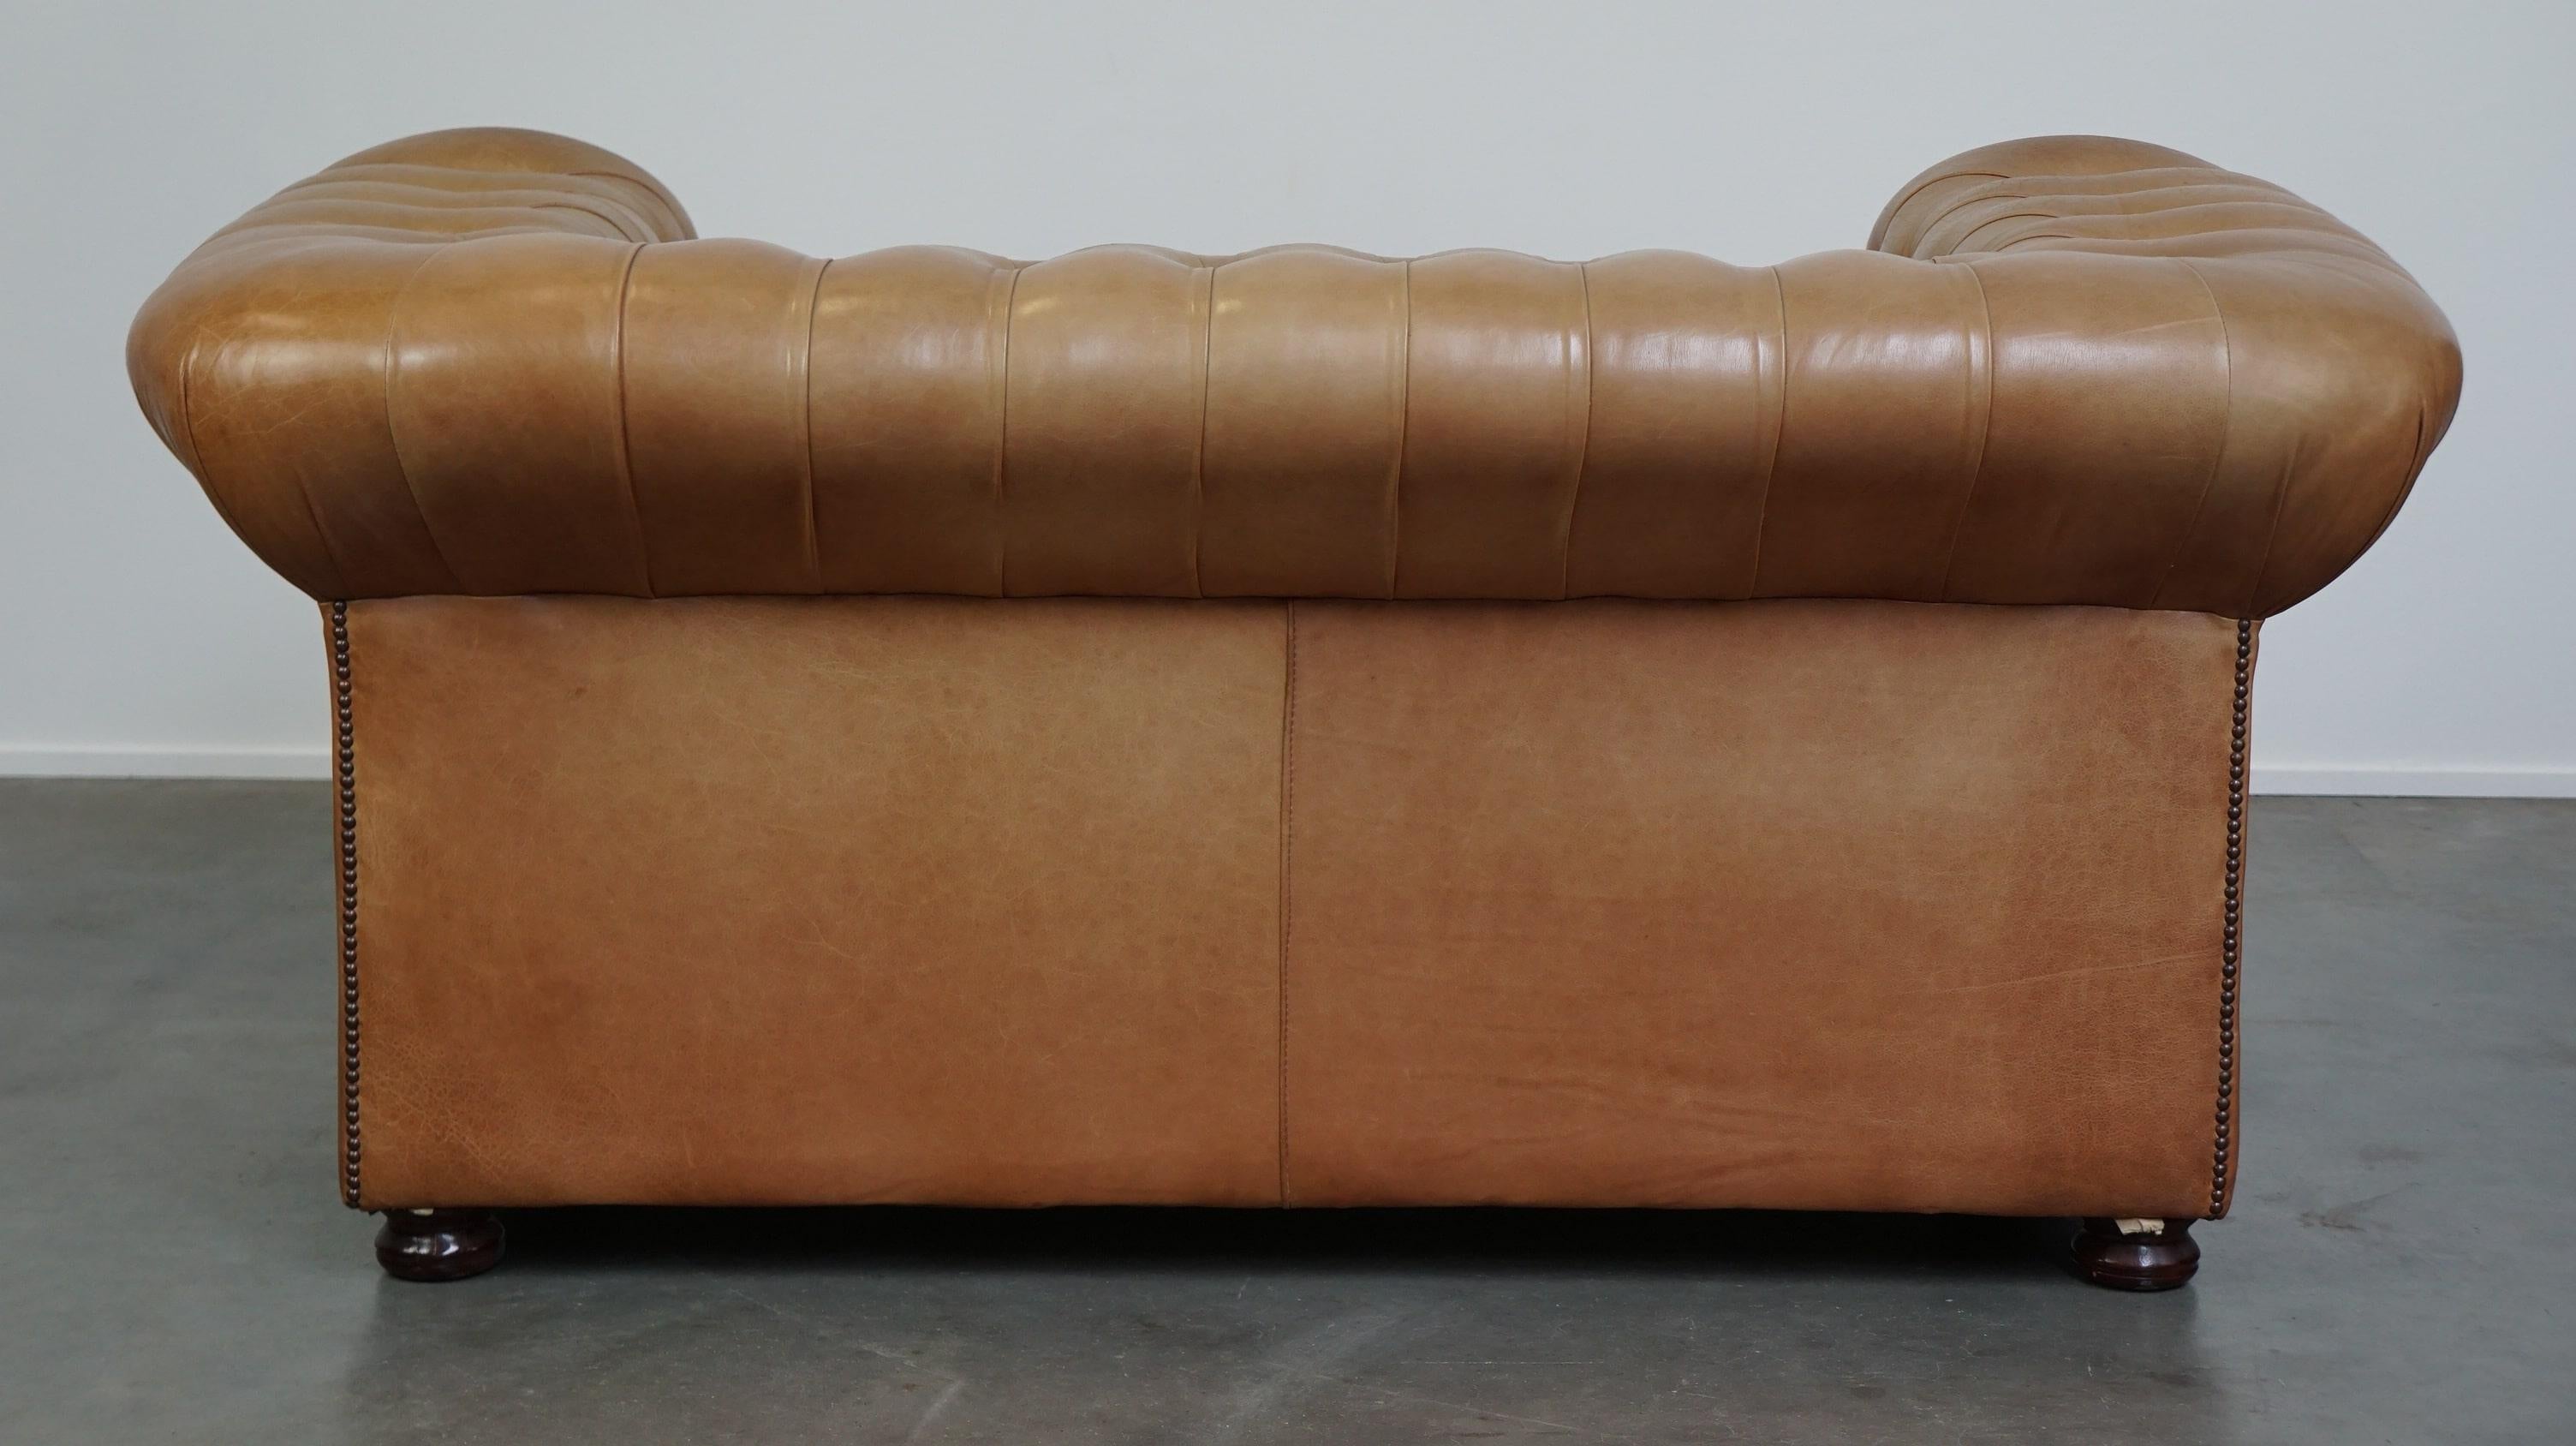 Beautiful Light Brown/Cream-Colored English Leather Chesterfield 2-Seater Sofa In Good Condition For Sale In Harderwijk, NL